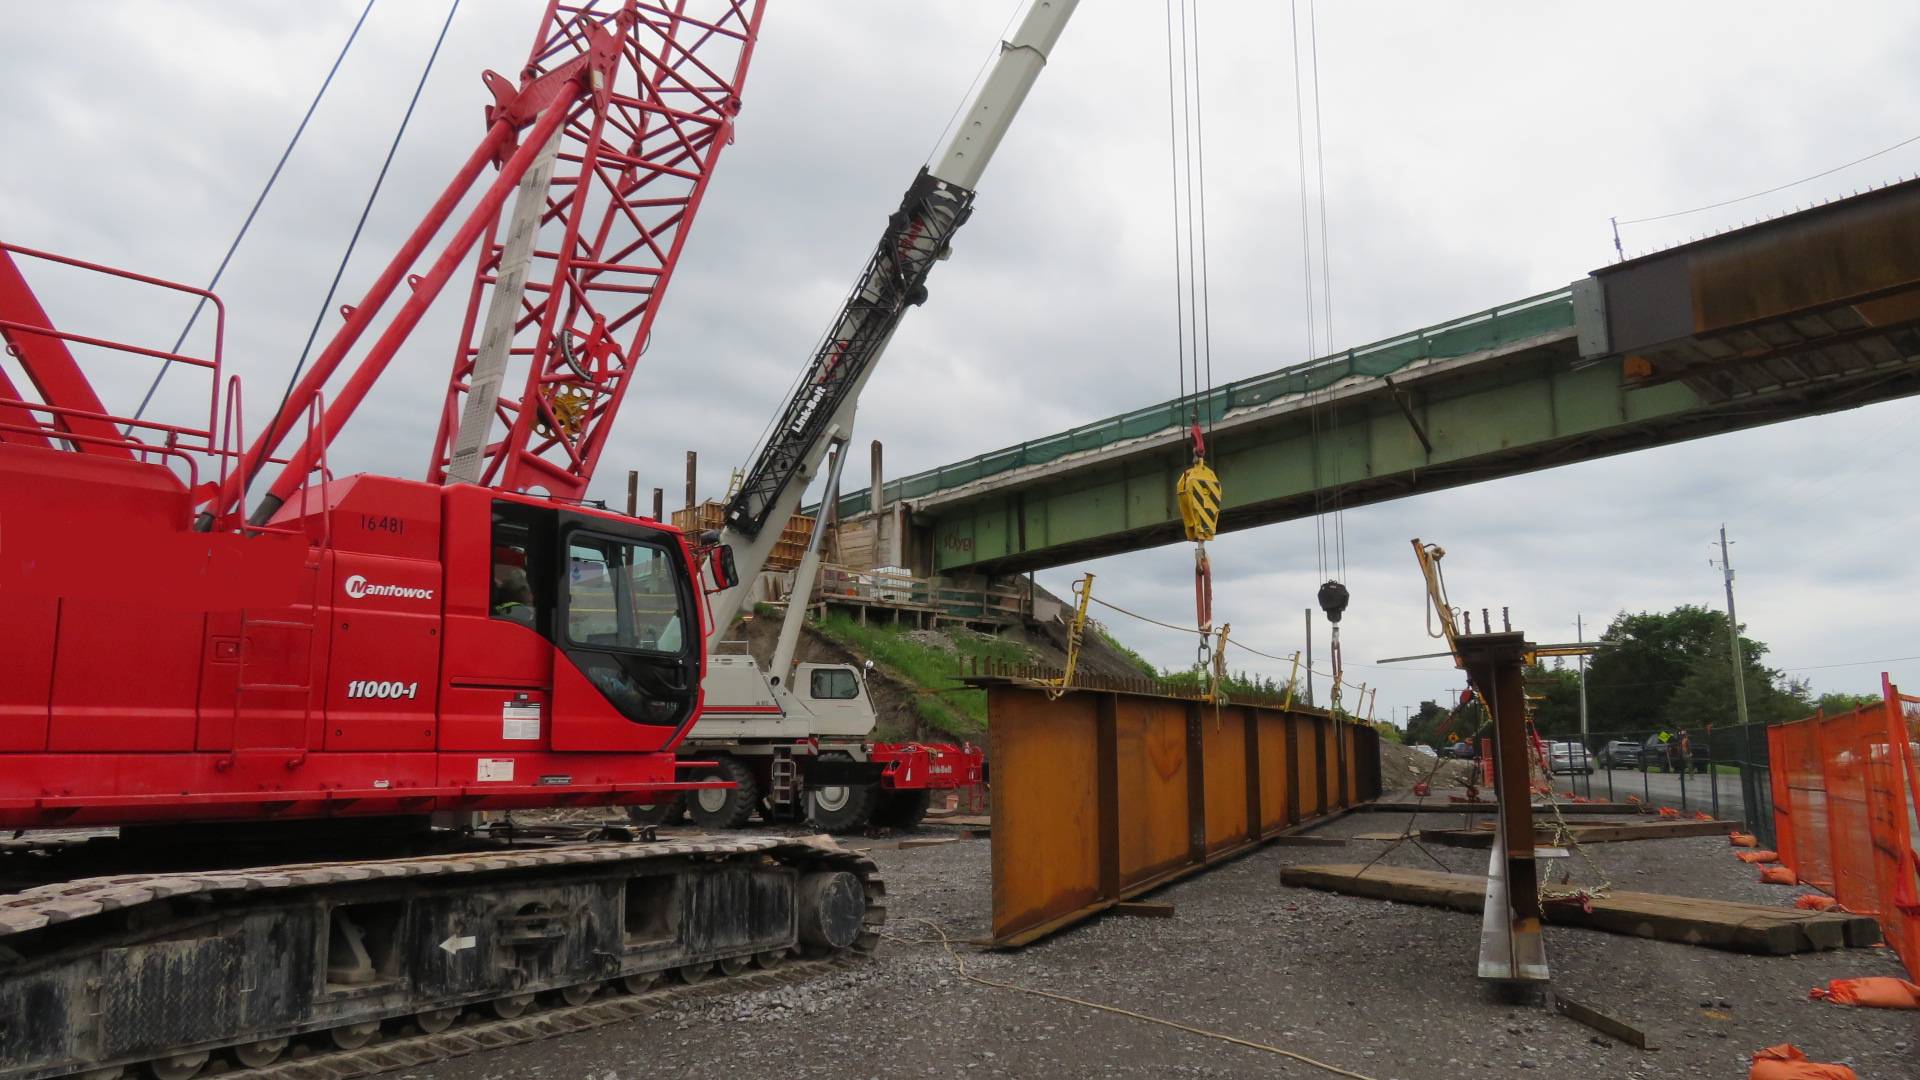 Both 110 and 160 ton cranes connected to the girder to be installed, pier 16 - south abutment